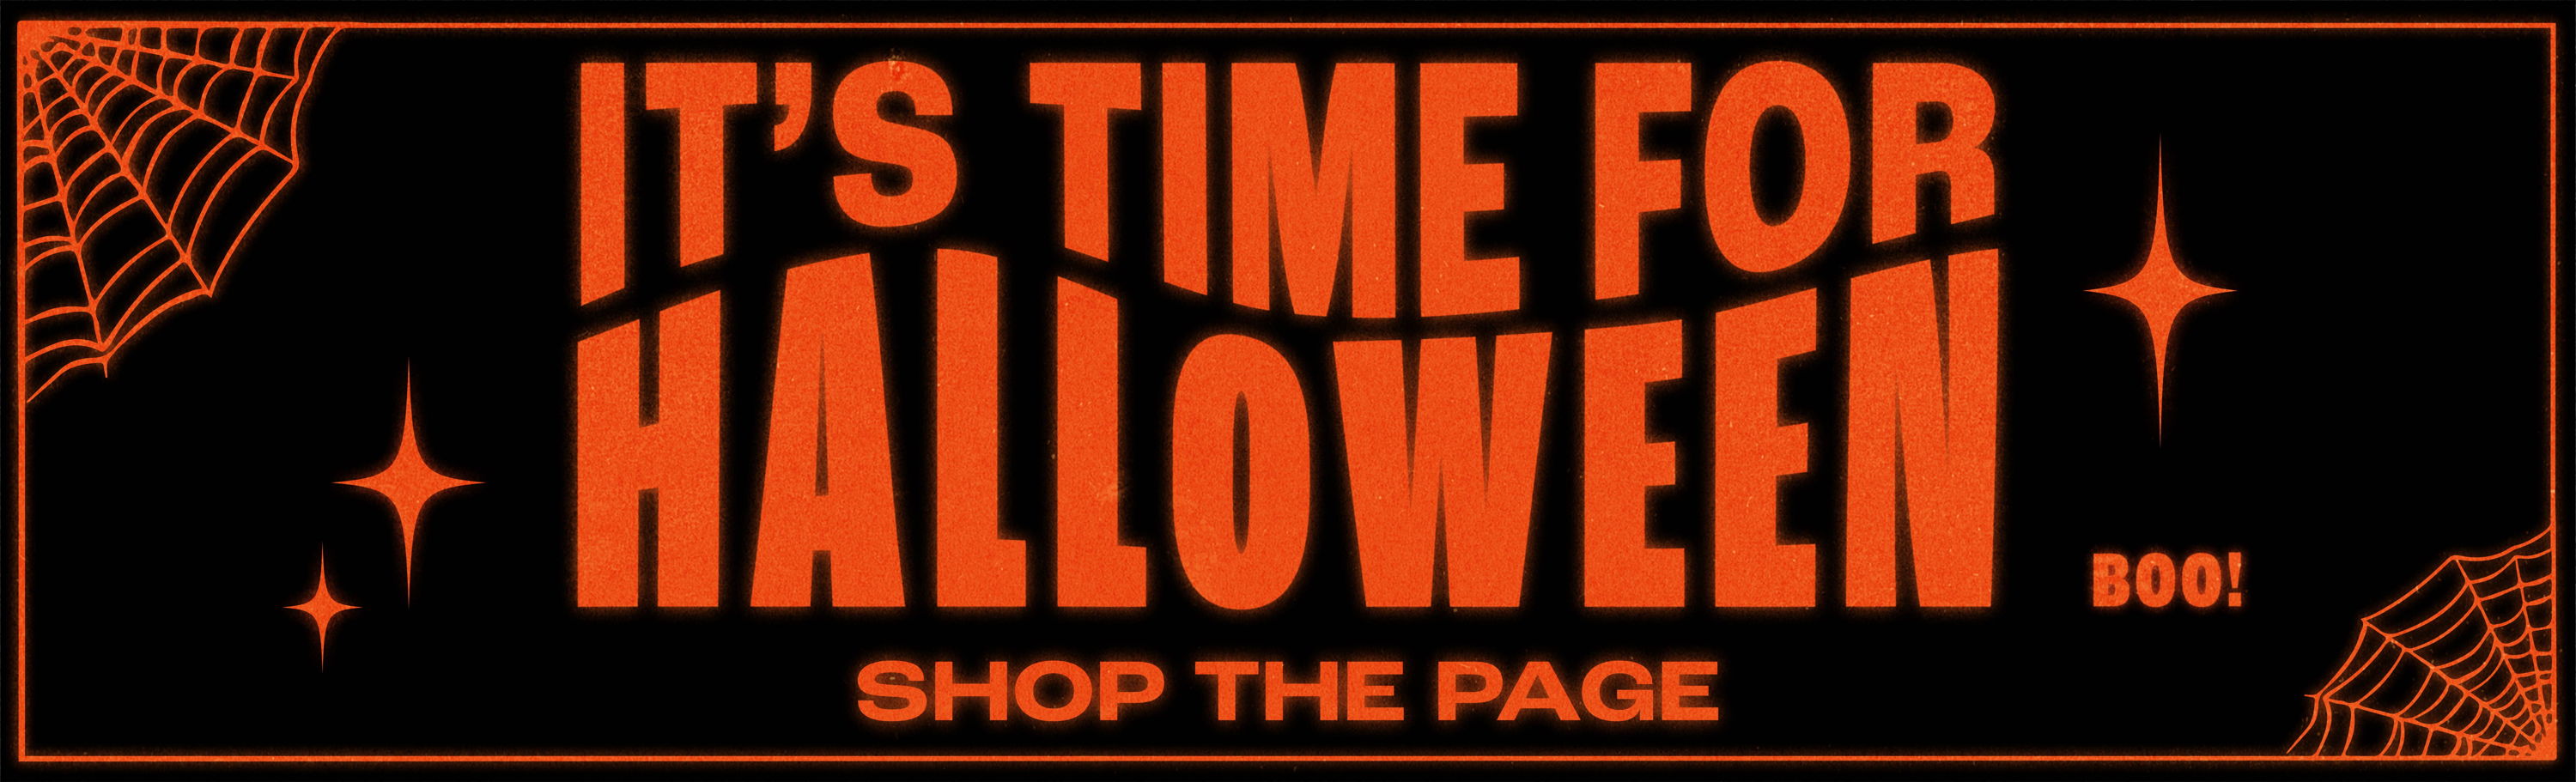 It's Time for Halloween. Shop the page!